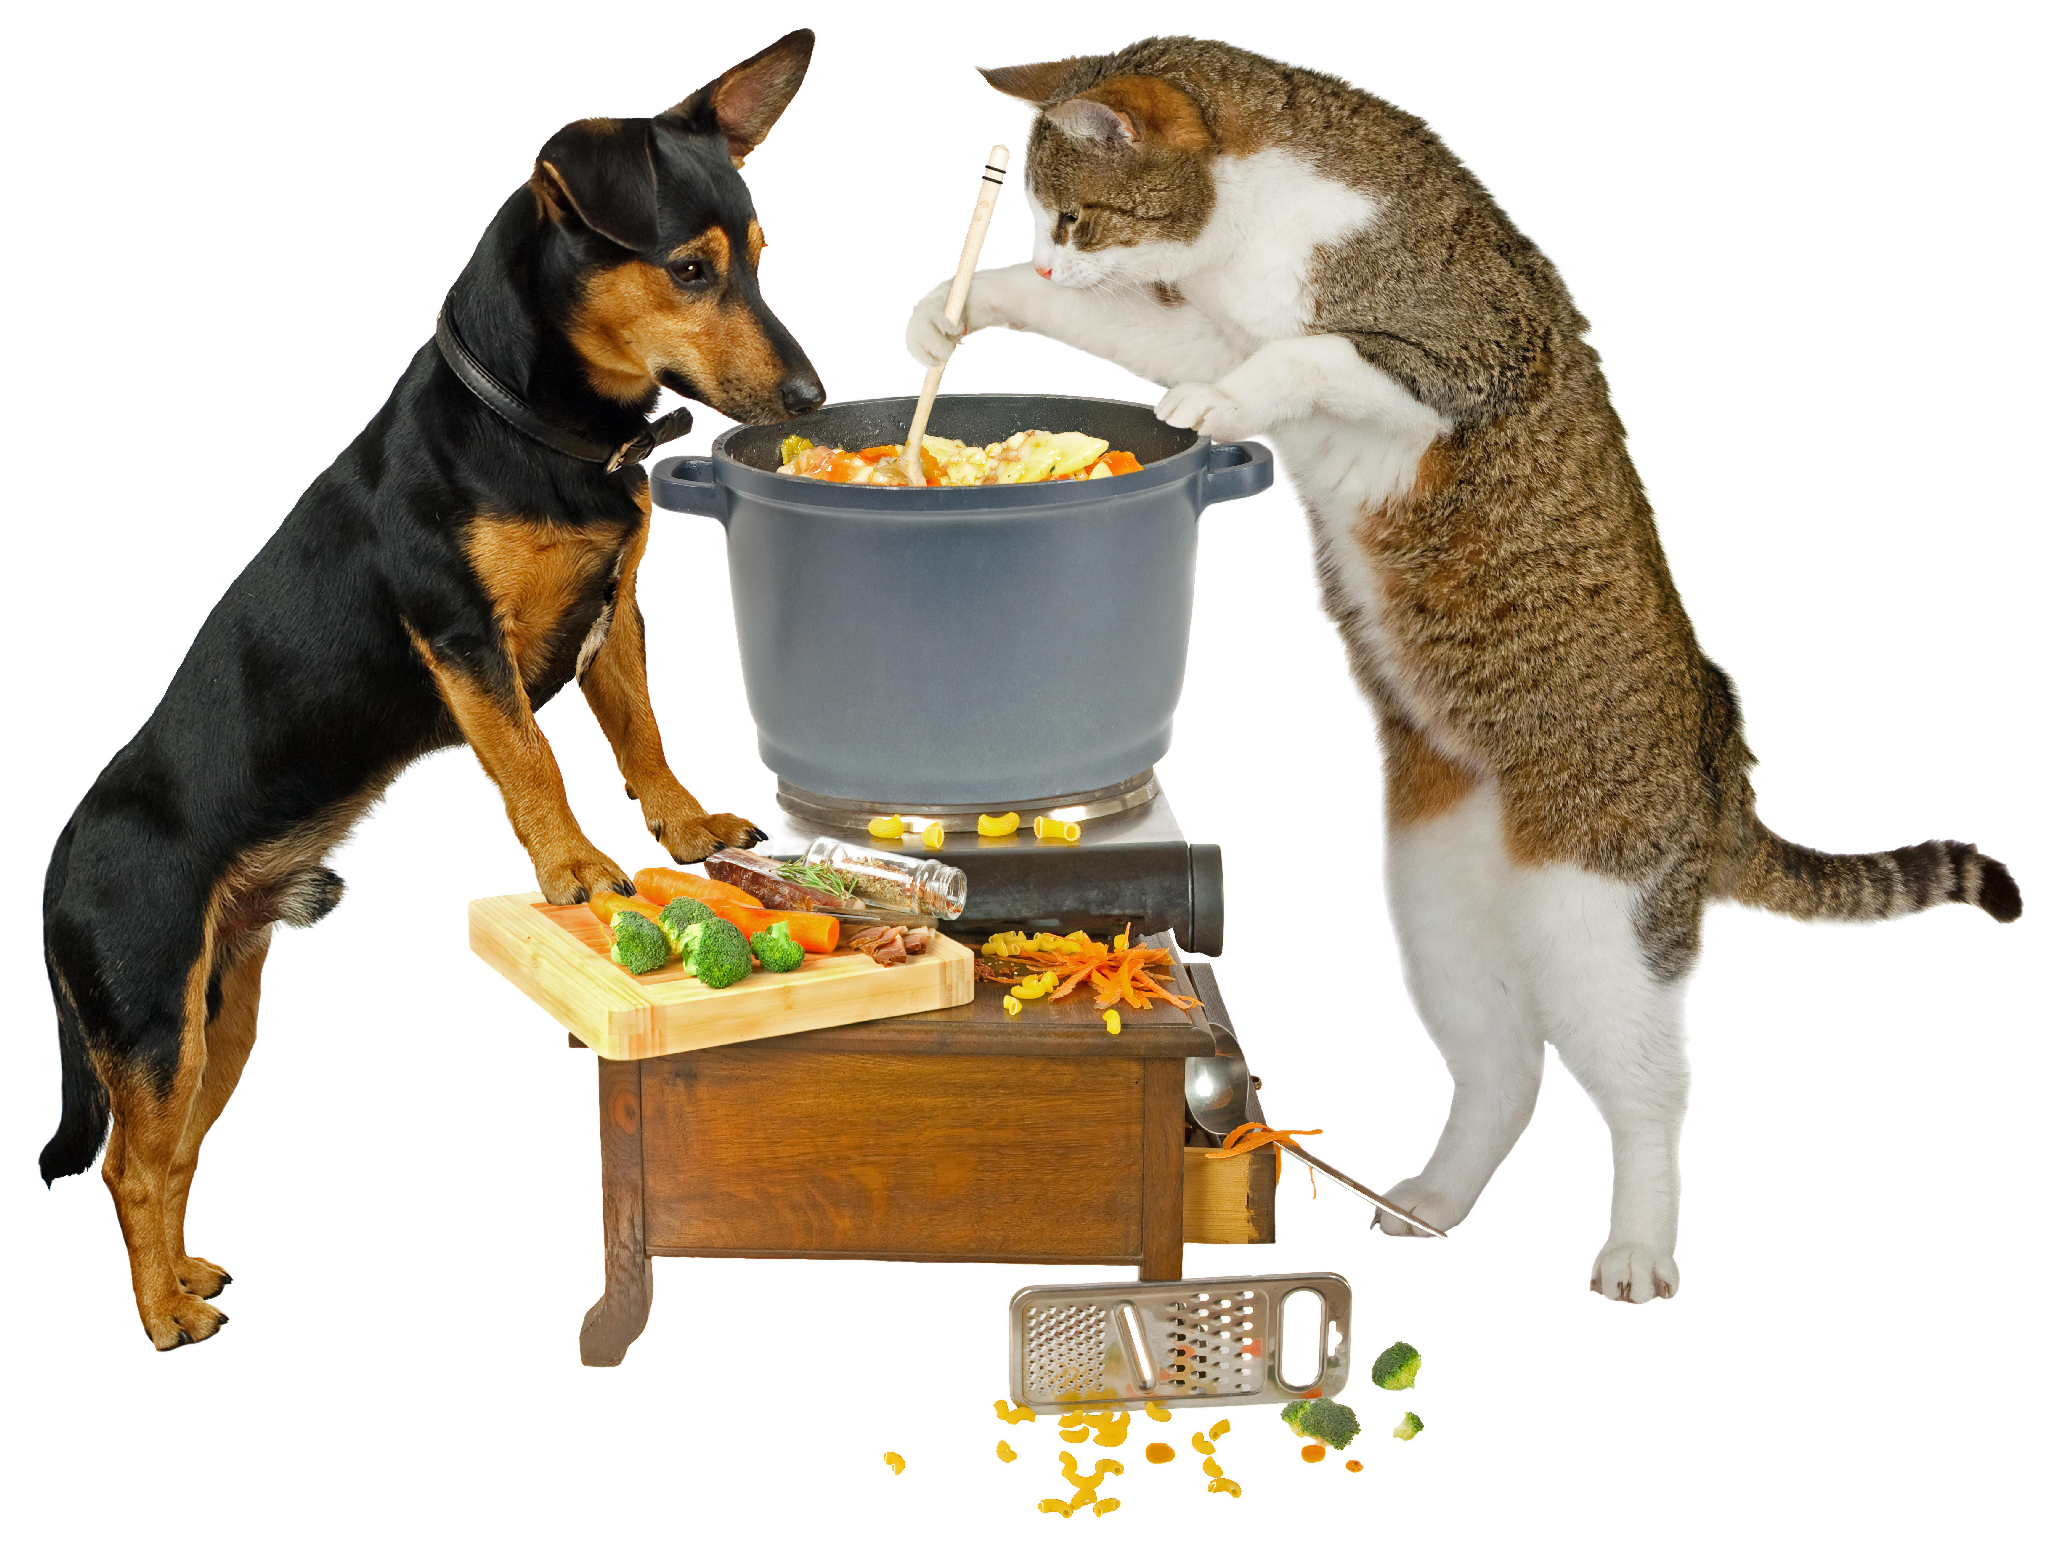 Is a Vegetarian Diet Good for Dogs or Cats?